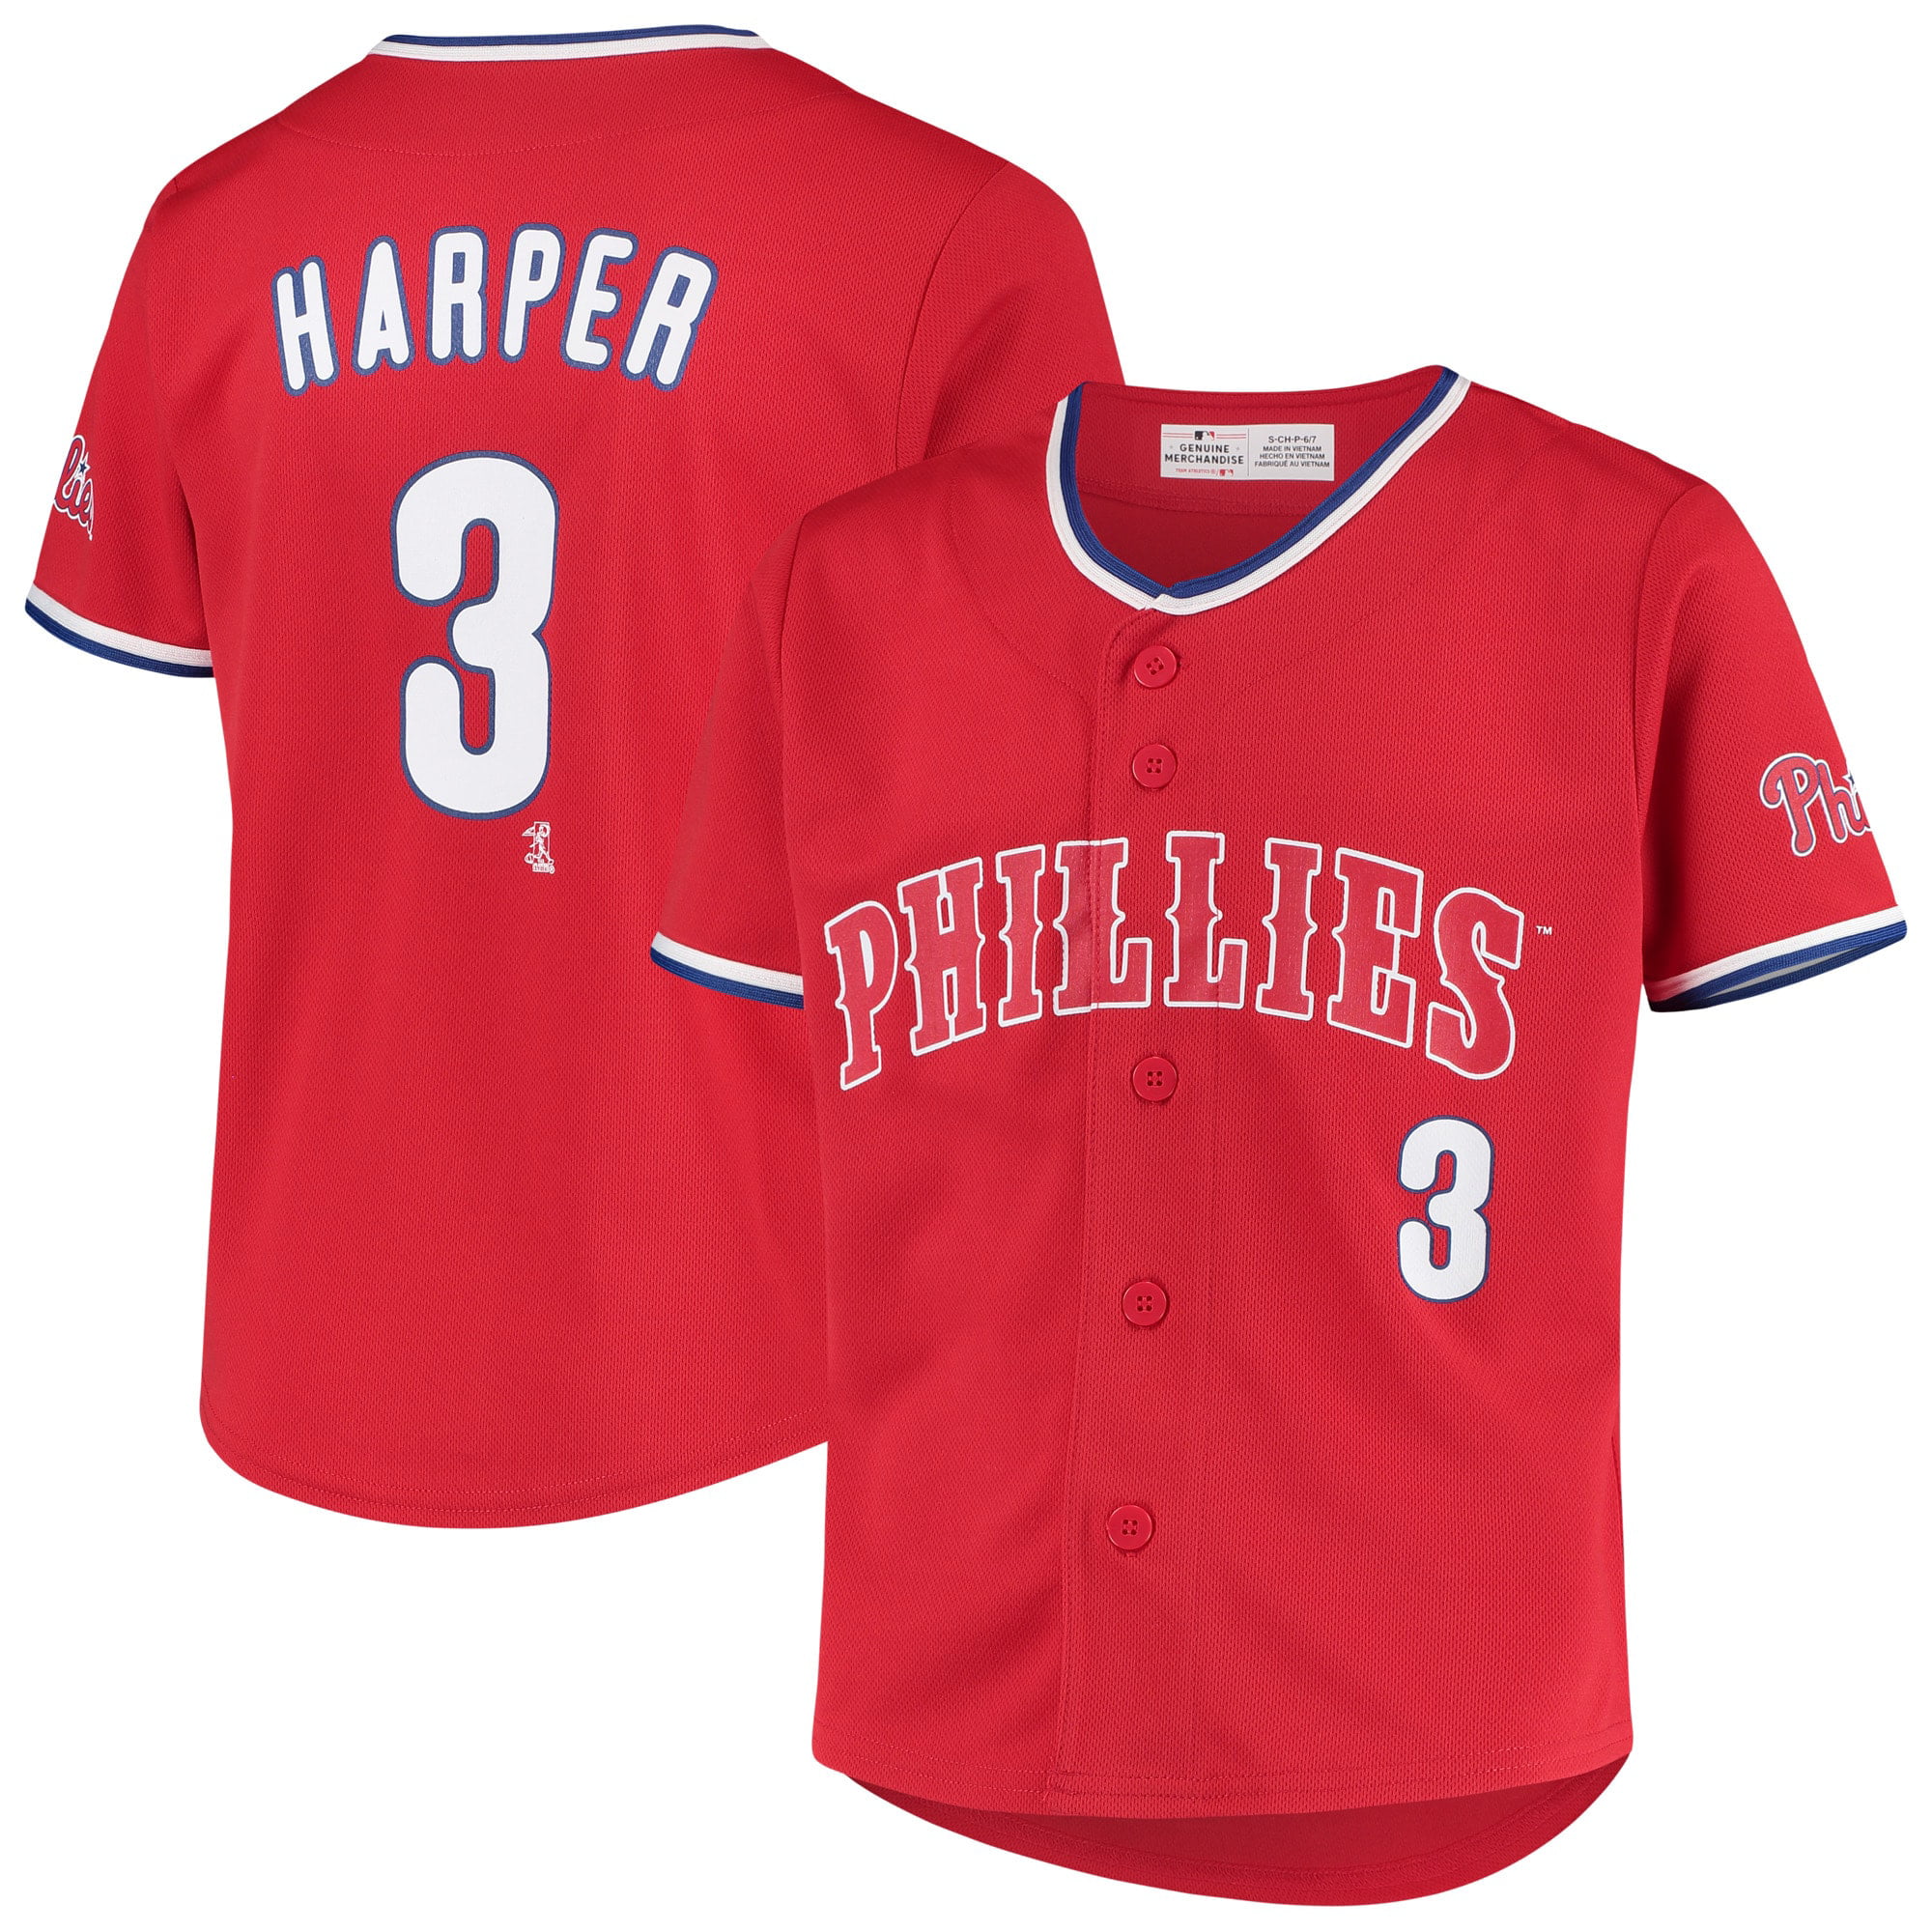 bryce harper jersey youth,Save up to 15%,www.ilcascinone.com